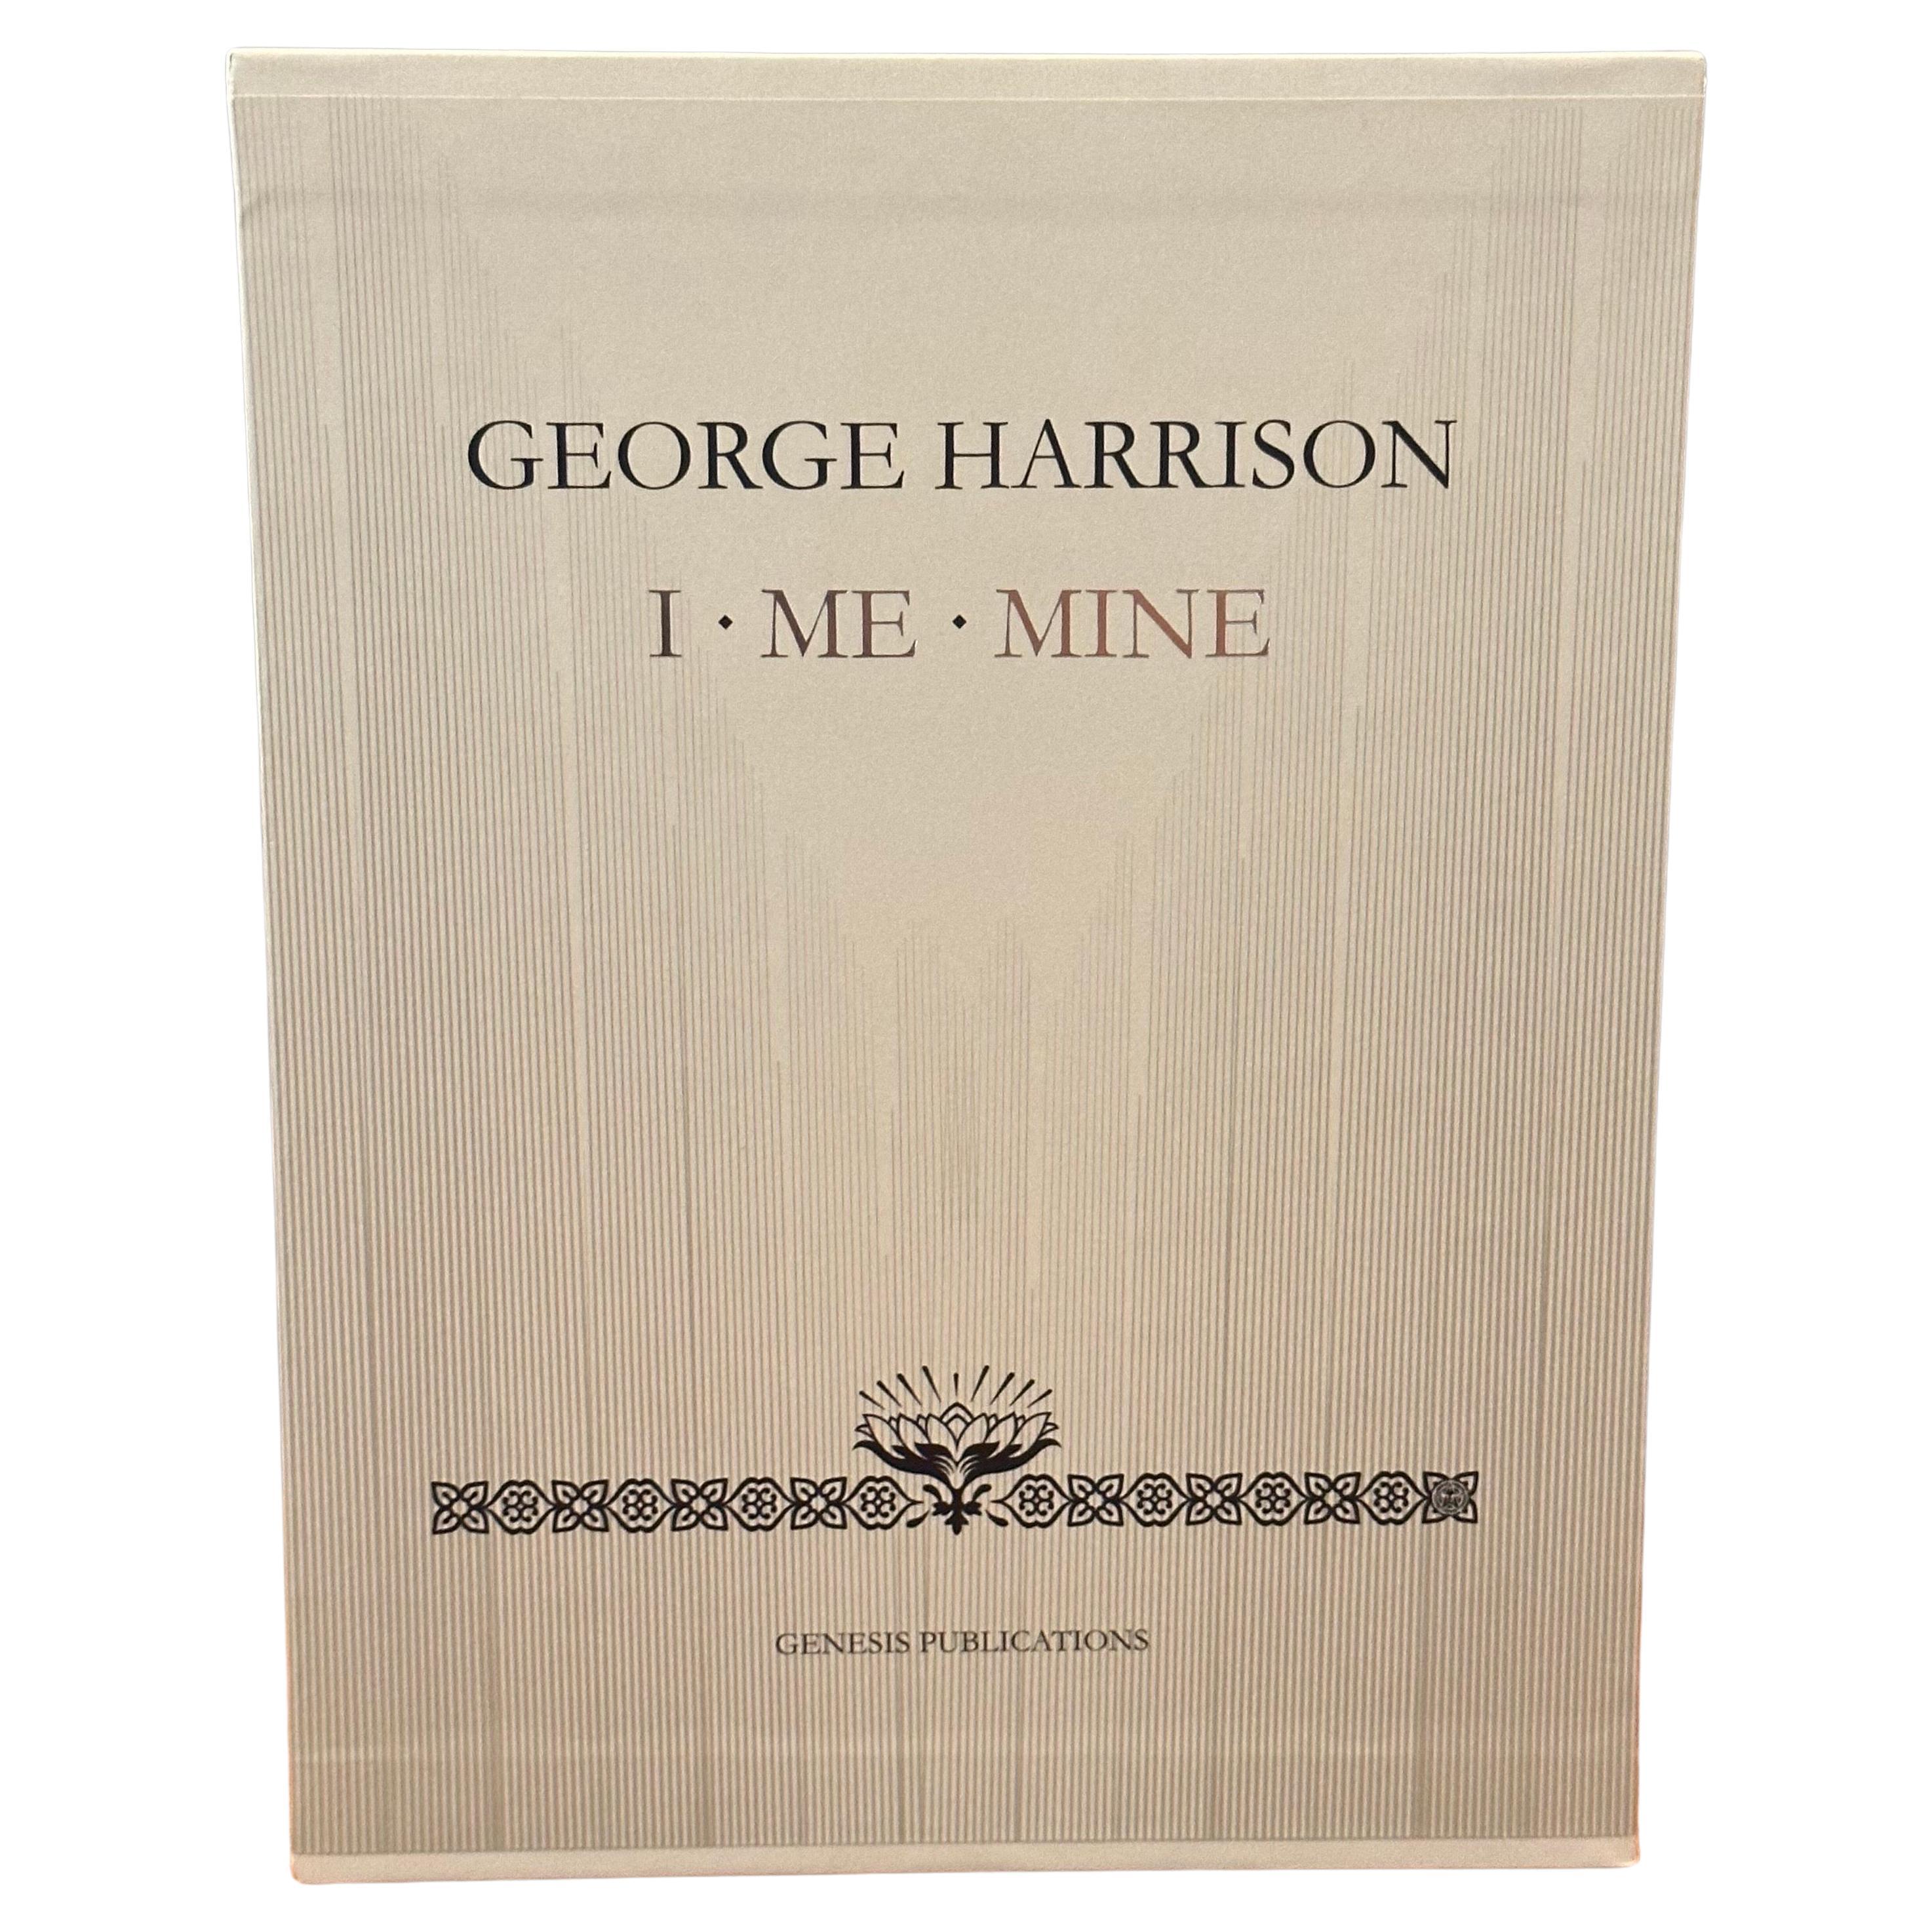 I ME MINE (PUBLISHER'S COPIES)
The Boxed Set, 2017

Cherished by fans and collectors, I ME MINE is the closest we will come to George Harrison's autobiography. This edition has been significantly developed since the book's first printing in 1980. 